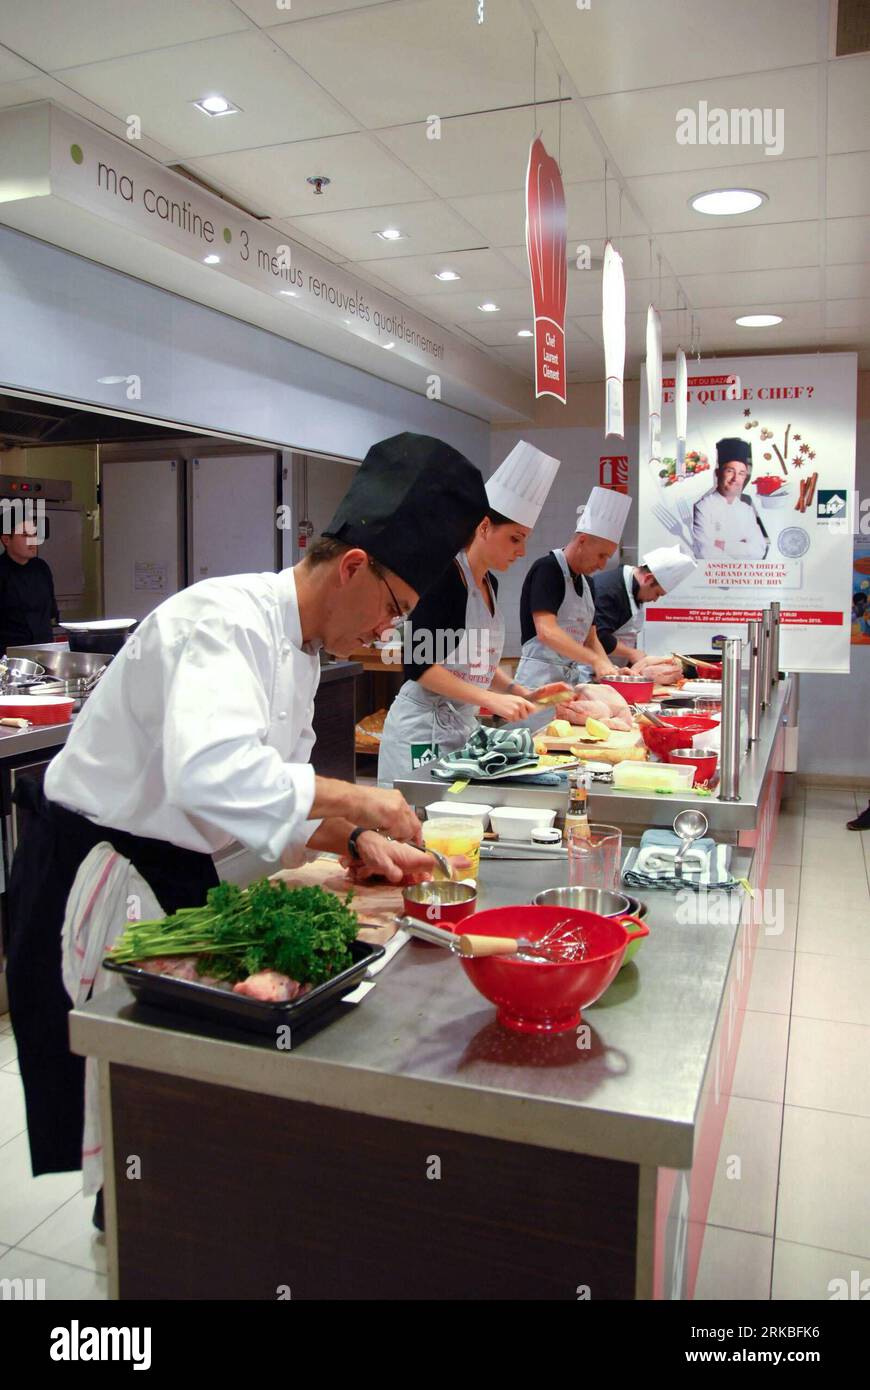 Bildnummer: 54551336  Datum: 20.10.2010  Copyright: imago/Xinhua (101020) -- PARIS, Oct. 20, 2010 (Xinhua) -- Starred chef Laurent Clement (L) and contestants compete in the Who s the Chef? competition in the Market BHV in Paris, France, Oct. 20, 2010. The ordinary challenge the starred chef Laurent Clement with a dish of French cuisine in the competition, while the judges are chosen from the customers in the market. The overall winner will win a night for two at the Luxury Hotel and a gourmet meal at the restaurant of the hotel. (Xinhua/Zhang Yina) (zw) FRANCE-PARIS-WHO S THE CHEF PUBLICATION Stock Photo